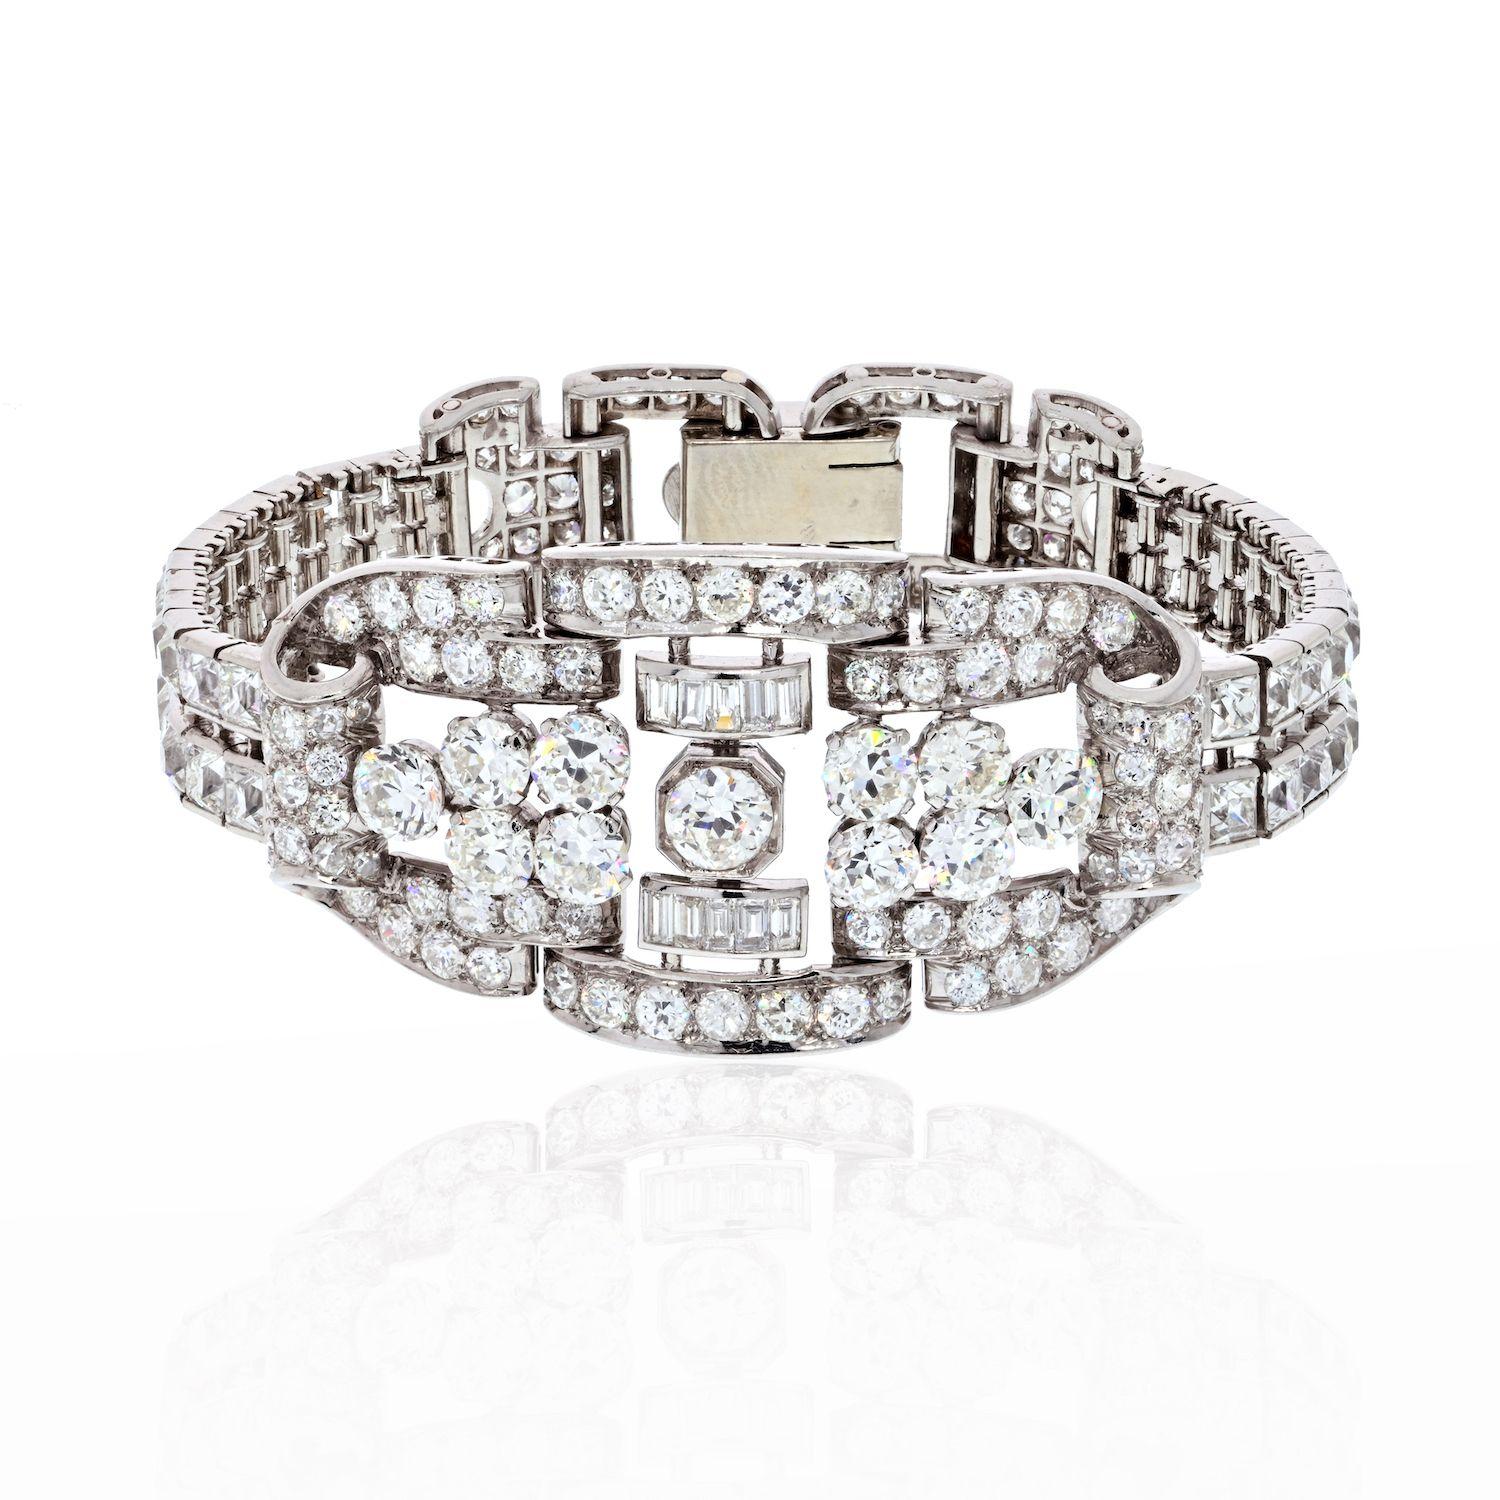 This particular piece is a perfect example of Art Deco craftsmanship and elegance! The bracelet is designed in platinum as an openwork panel that graduates from a central plaque featuring a series of old cut diamonds with a further embellishment of